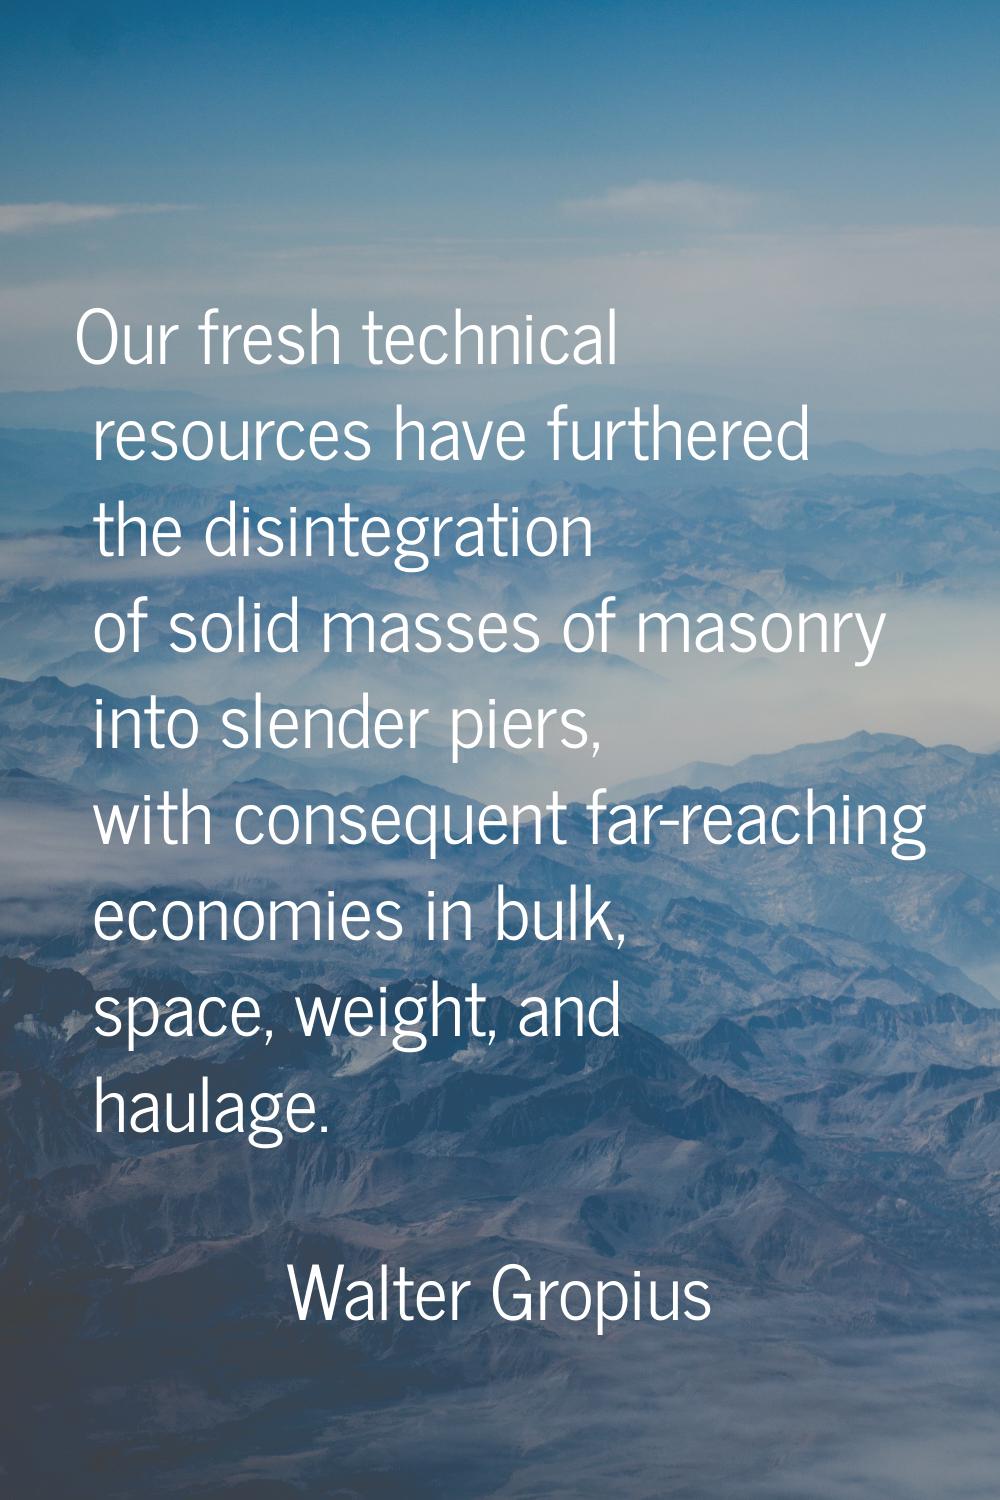 Our fresh technical resources have furthered the disintegration of solid masses of masonry into sle